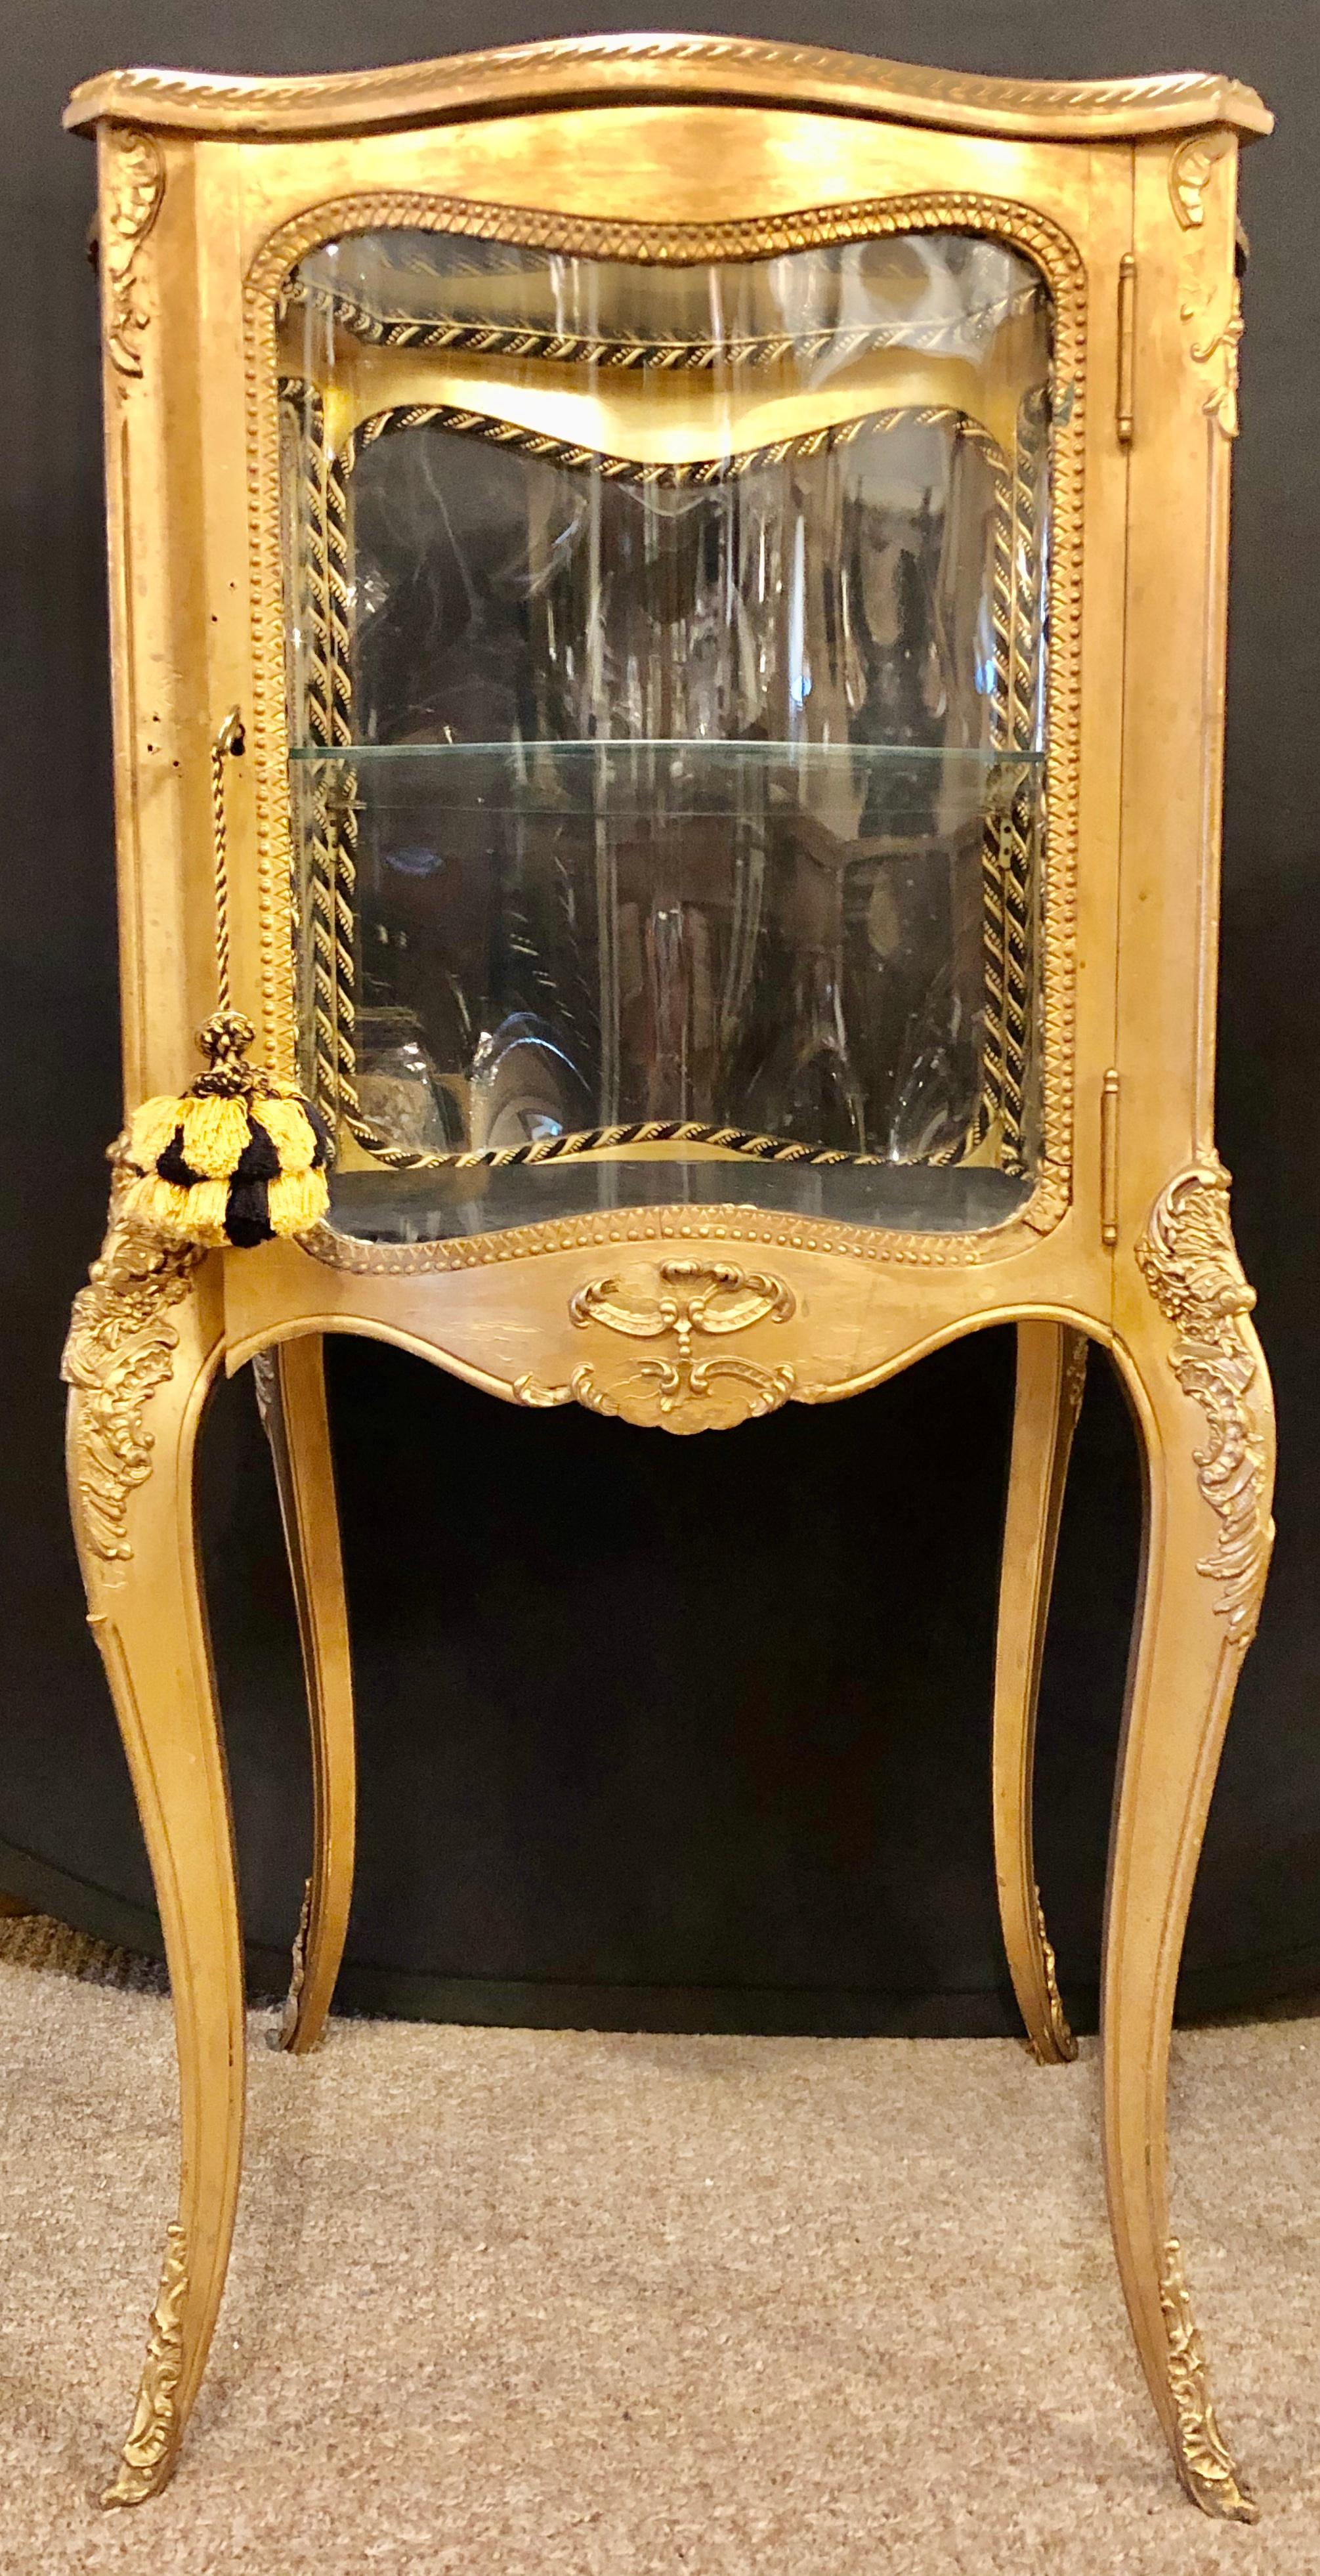 French 19th-20th century curio vitrine cabinet curved glass all round. This is a simply stunning Vitrine or Curio that can sit center room and is serpentine shaped on all sides. The Louis XV style cabinet is gilt wood with bronze mounts. If need be